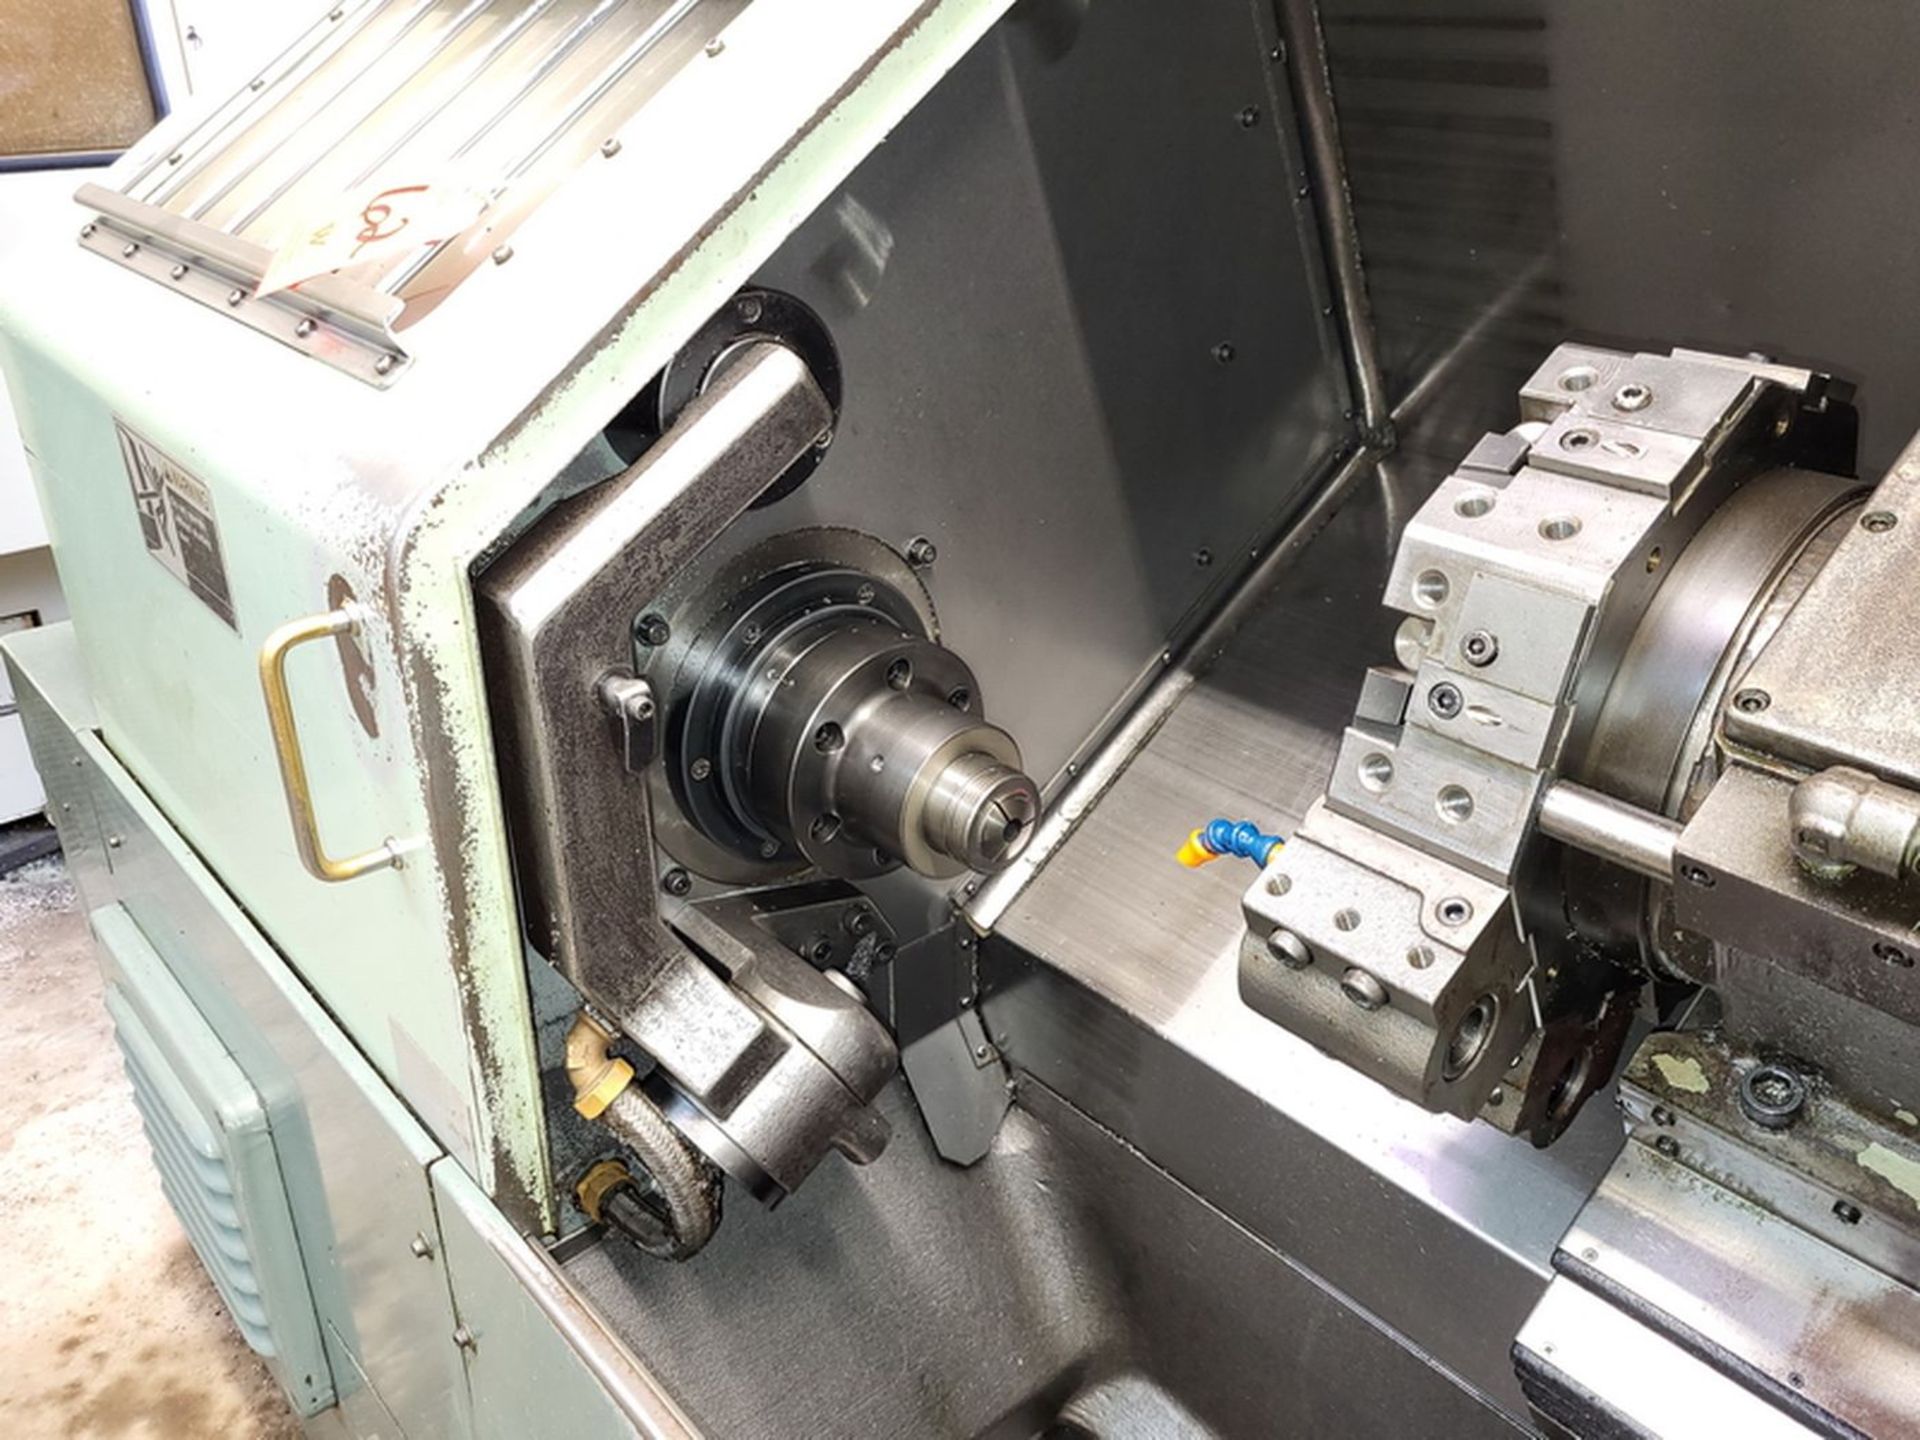 Mori Seiki Model AL-2ATM CNC Lathe, S/N: 937; with 8-Position Turret, Collet Chuck, Tool Setter, - Image 6 of 13